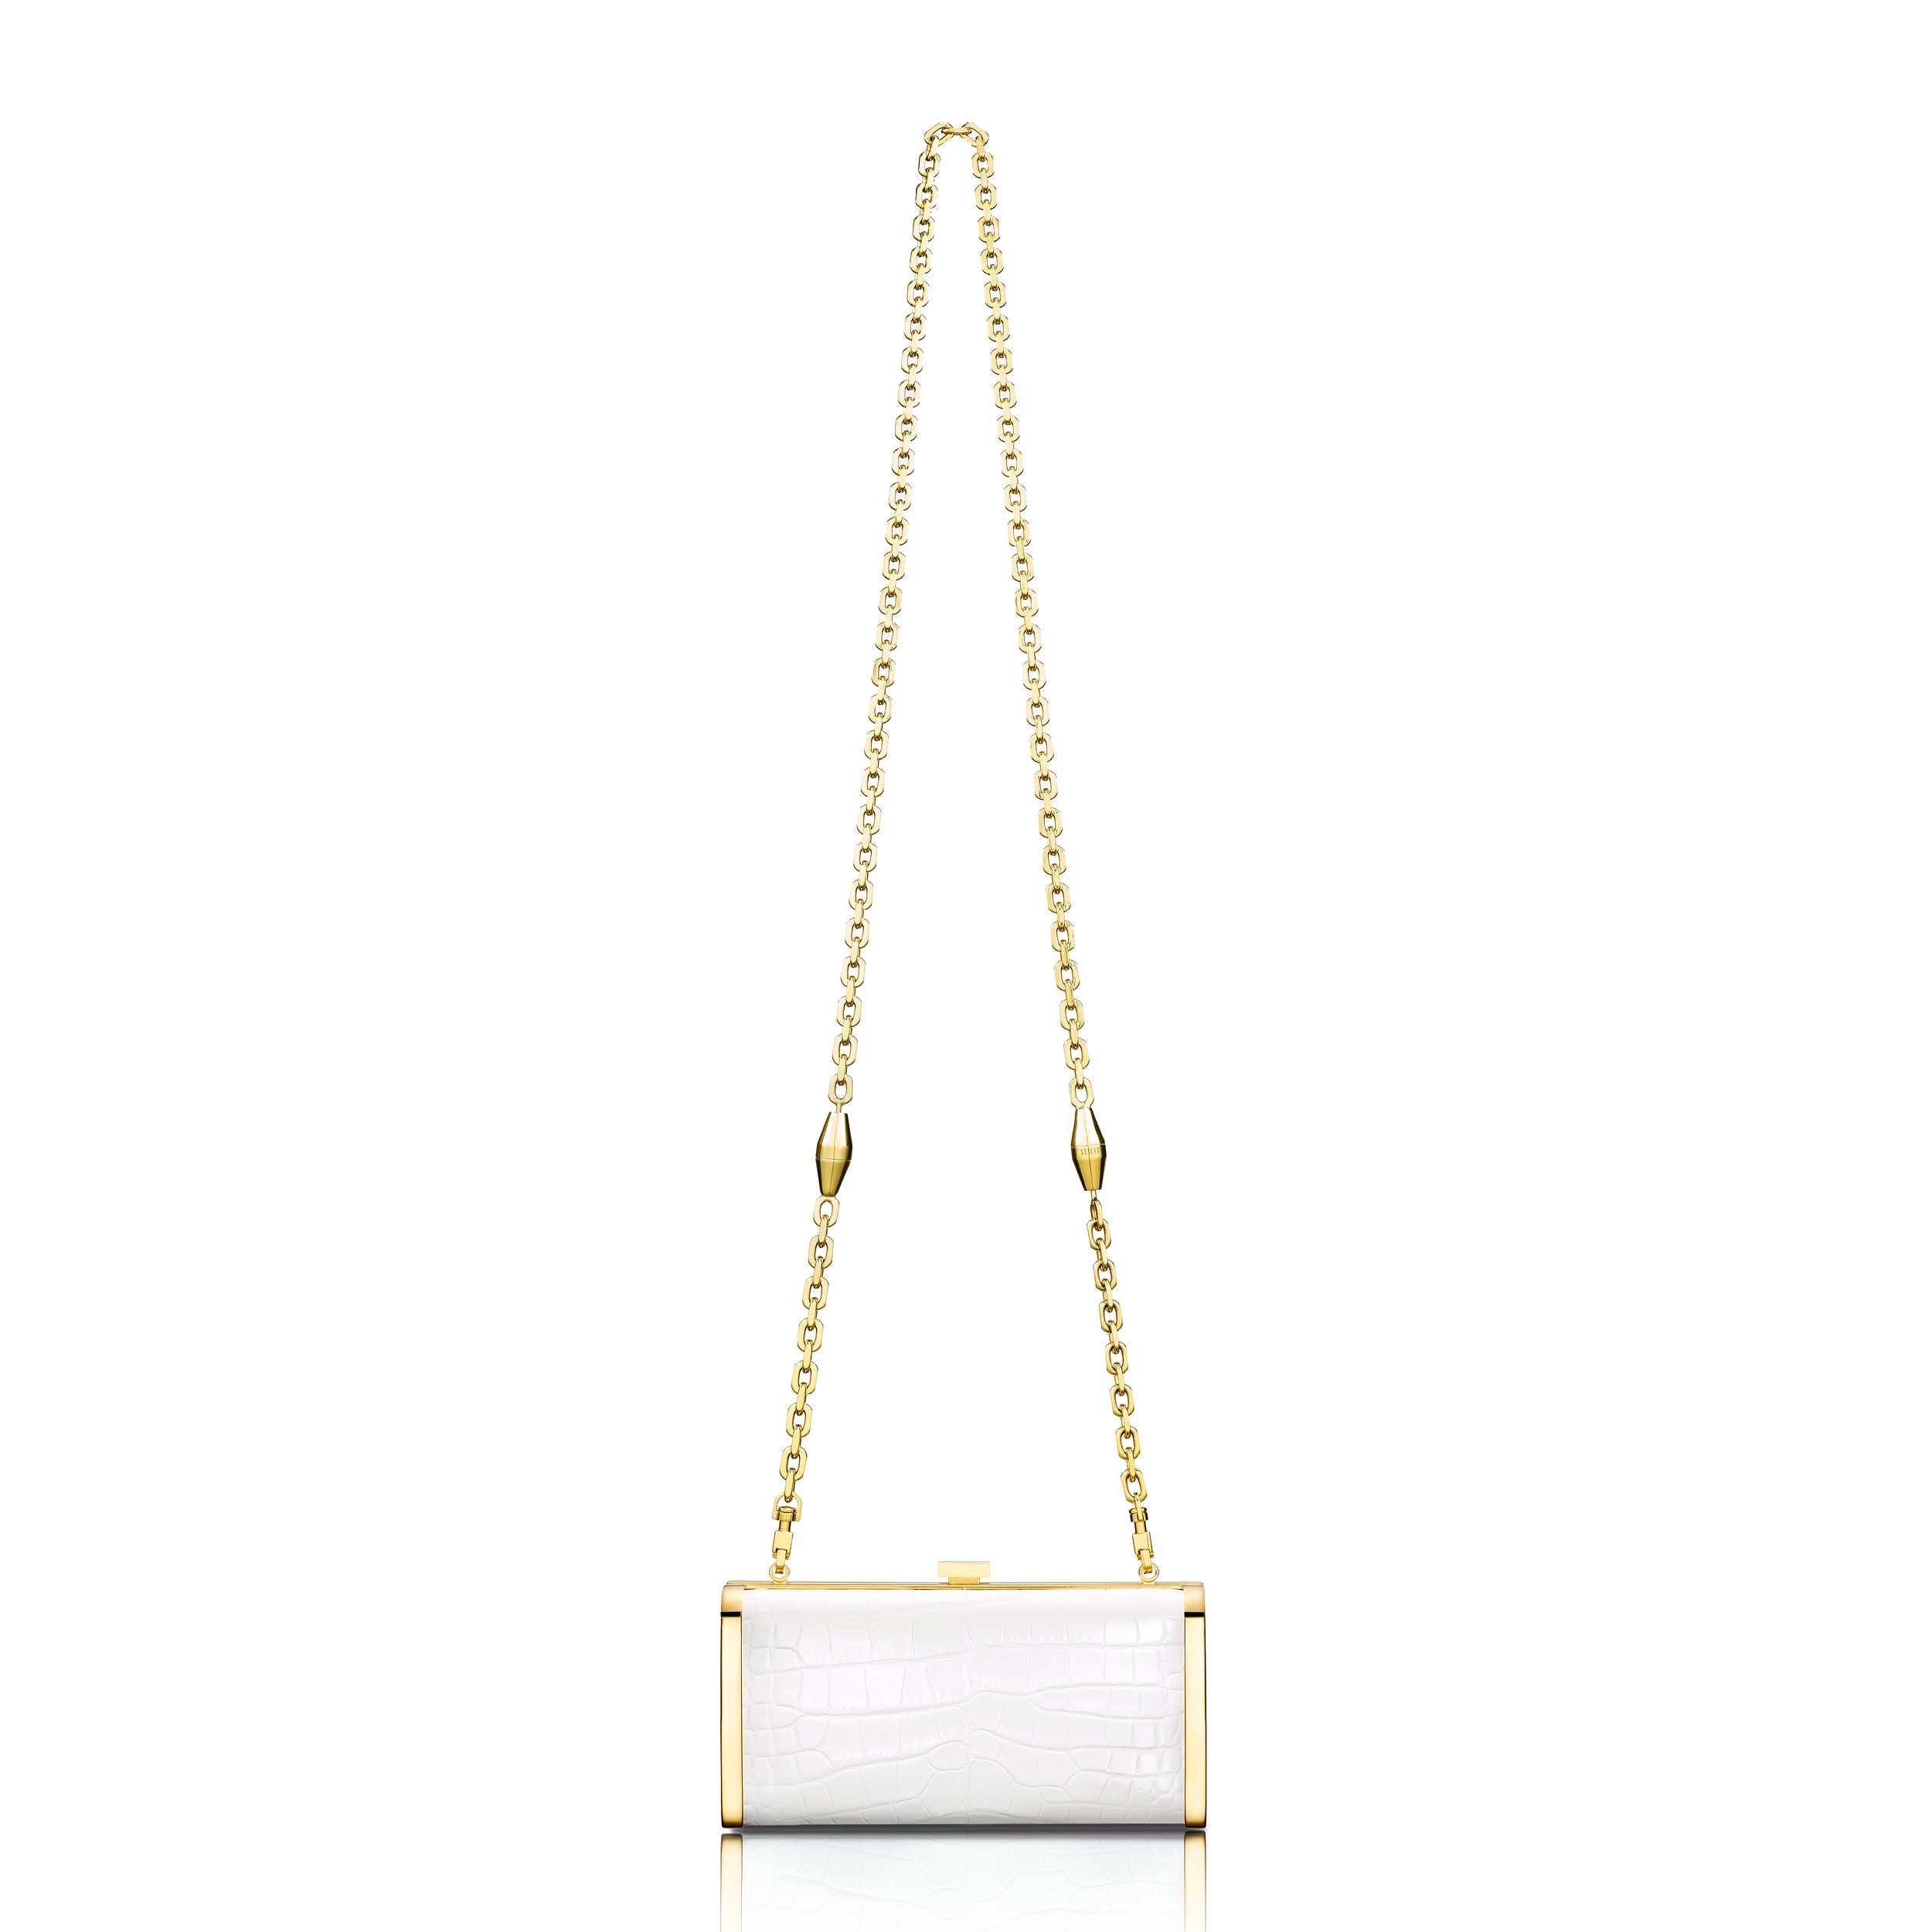 STALVEY Square Clutch in White Alligator with 24kt Gold Hardware Back View with Chain